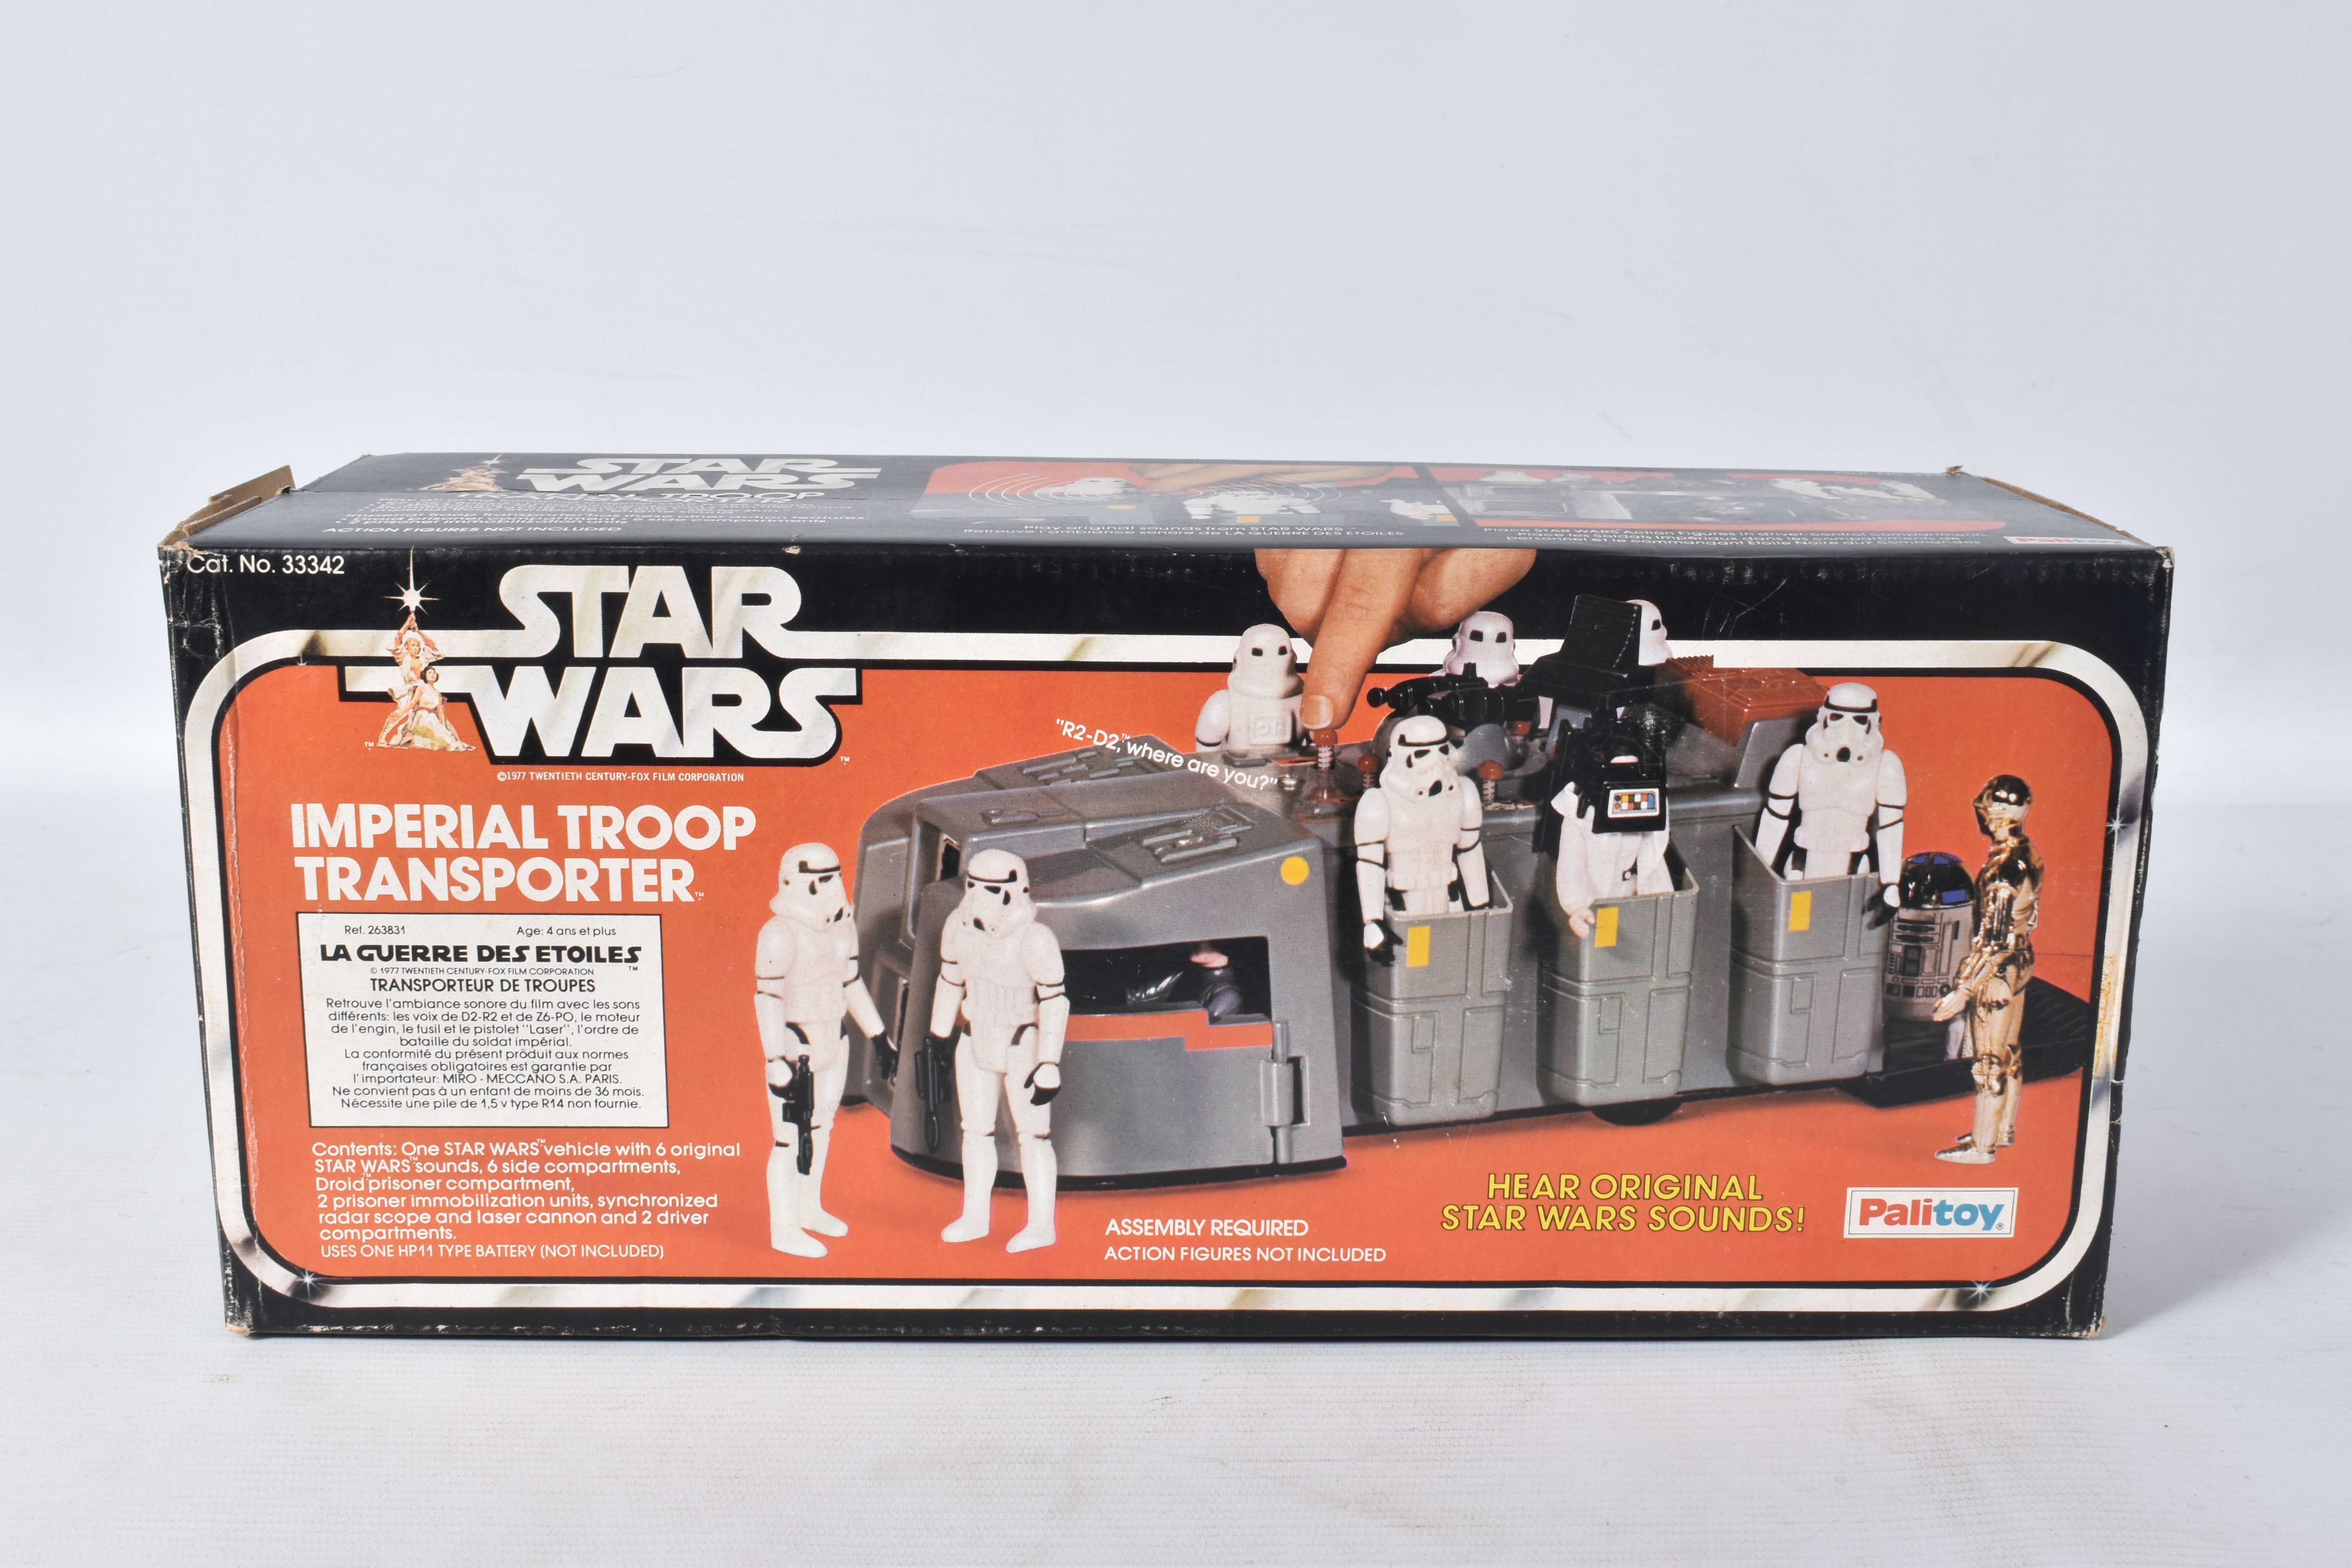 A BOXED PALITOY STAR WARS IMPERIAL TROOP TRANSPORTER, no. 33342, Sellotape has been removed from - Image 12 of 14